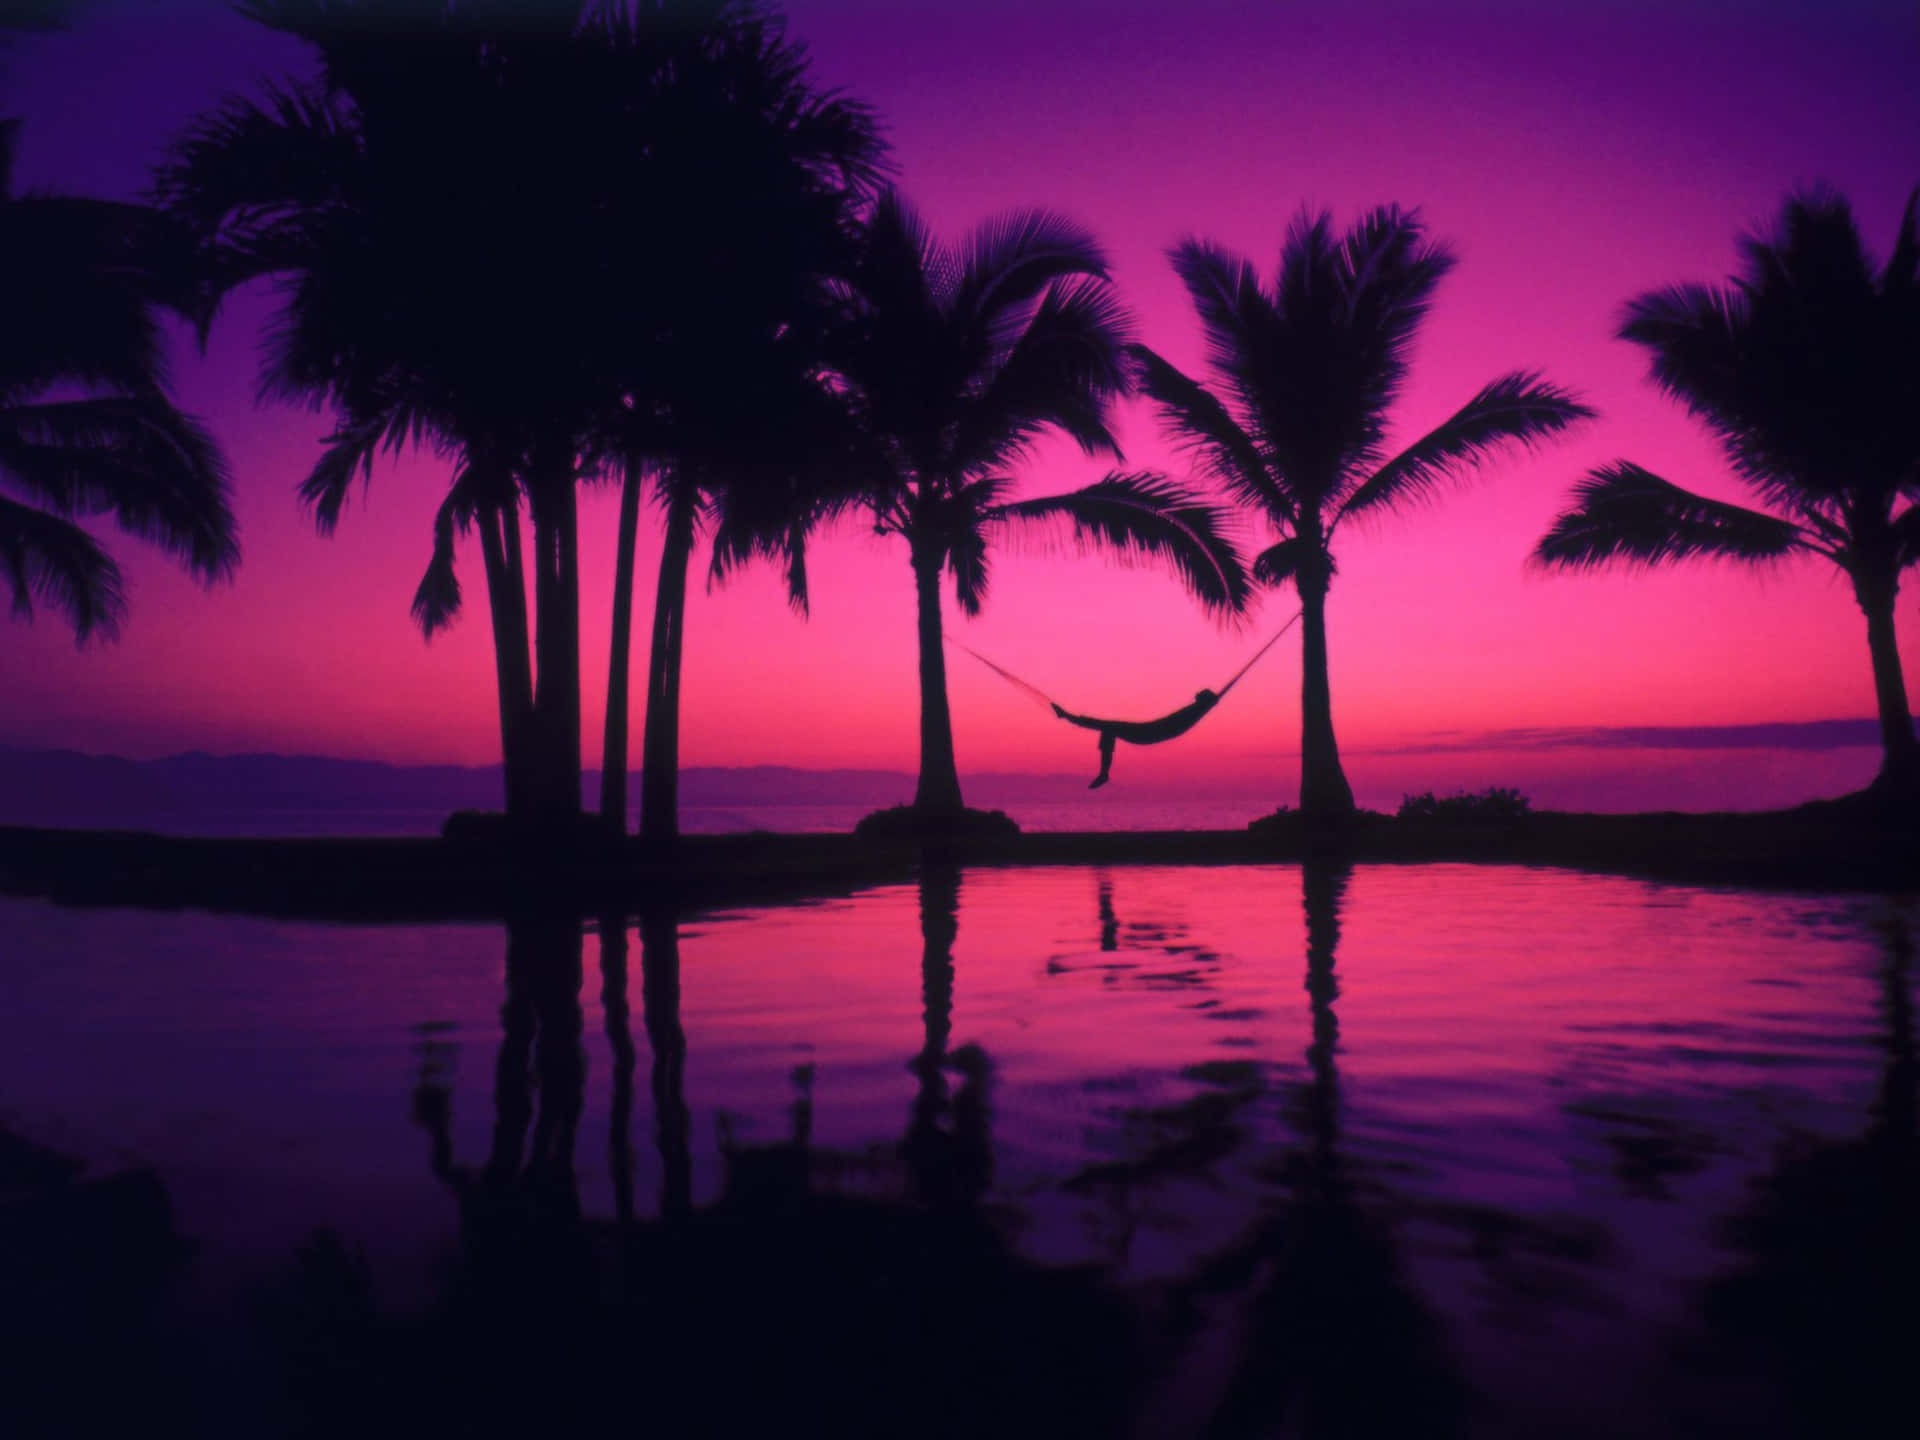 "A beautiful blend of blues and purples as the sun sets" Wallpaper